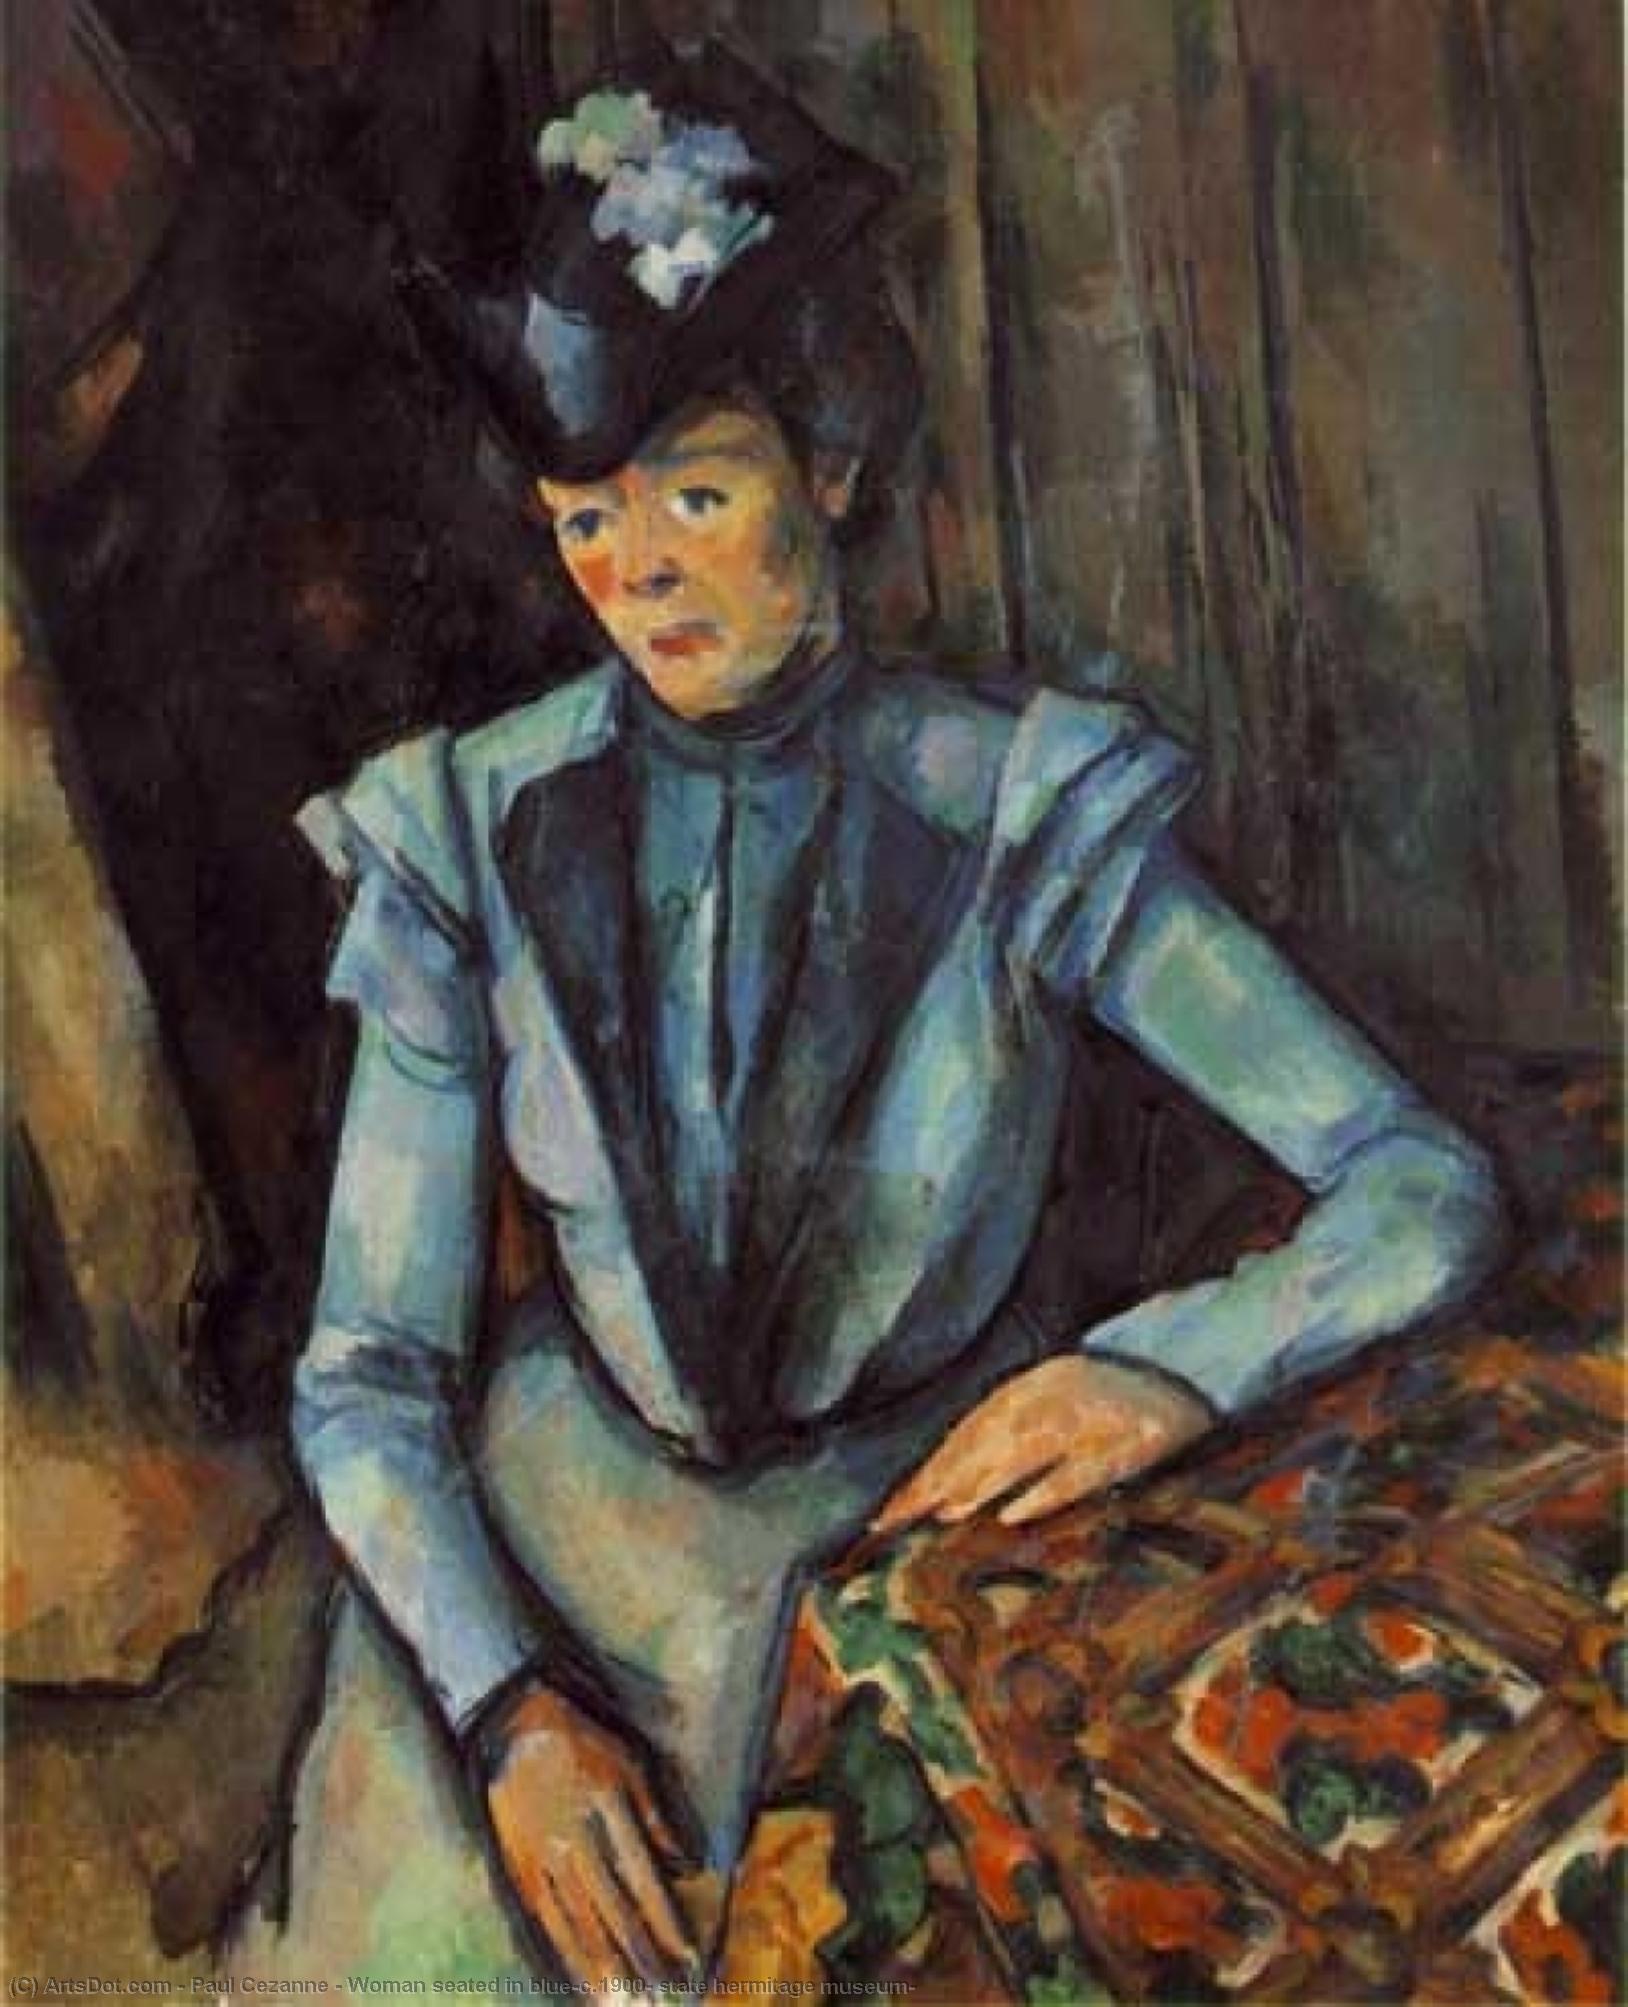 WikiOO.org - 백과 사전 - 회화, 삽화 Paul Cezanne - Woman seated in blue,c.1900, state hermitage museum,